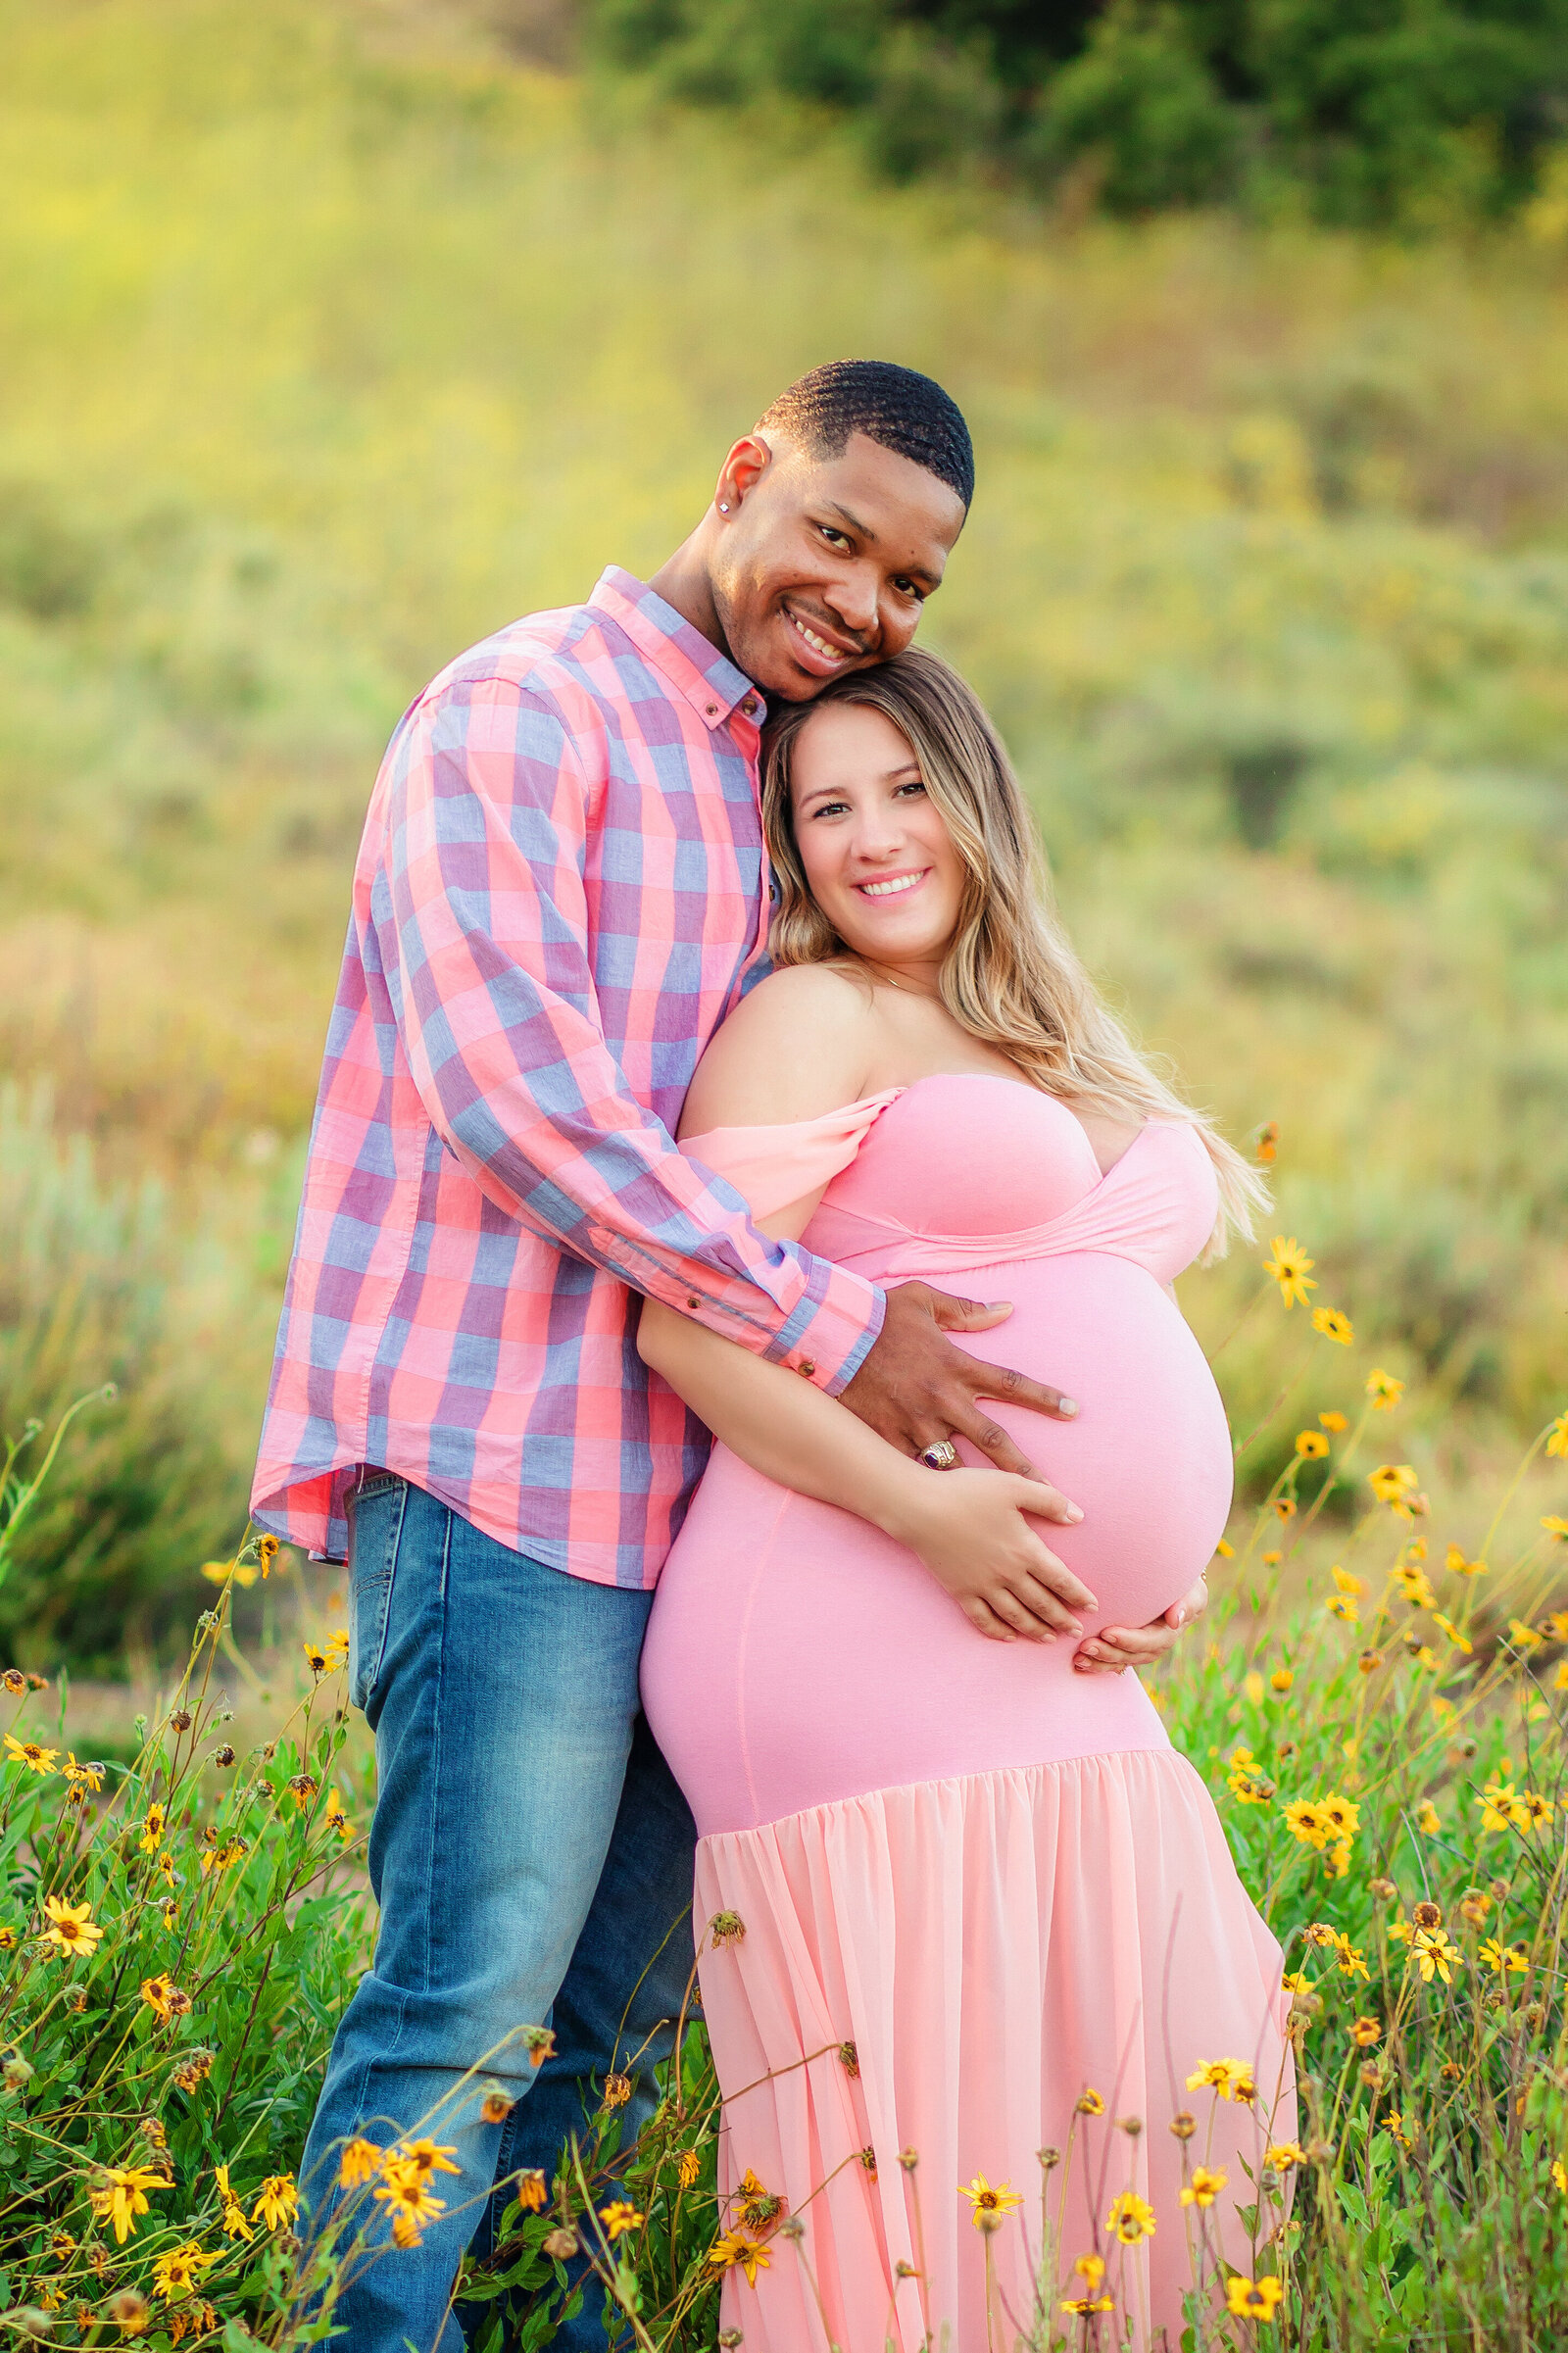 Maternity Photographer, a couple embrace in a field of wildflowers, she is pregnant